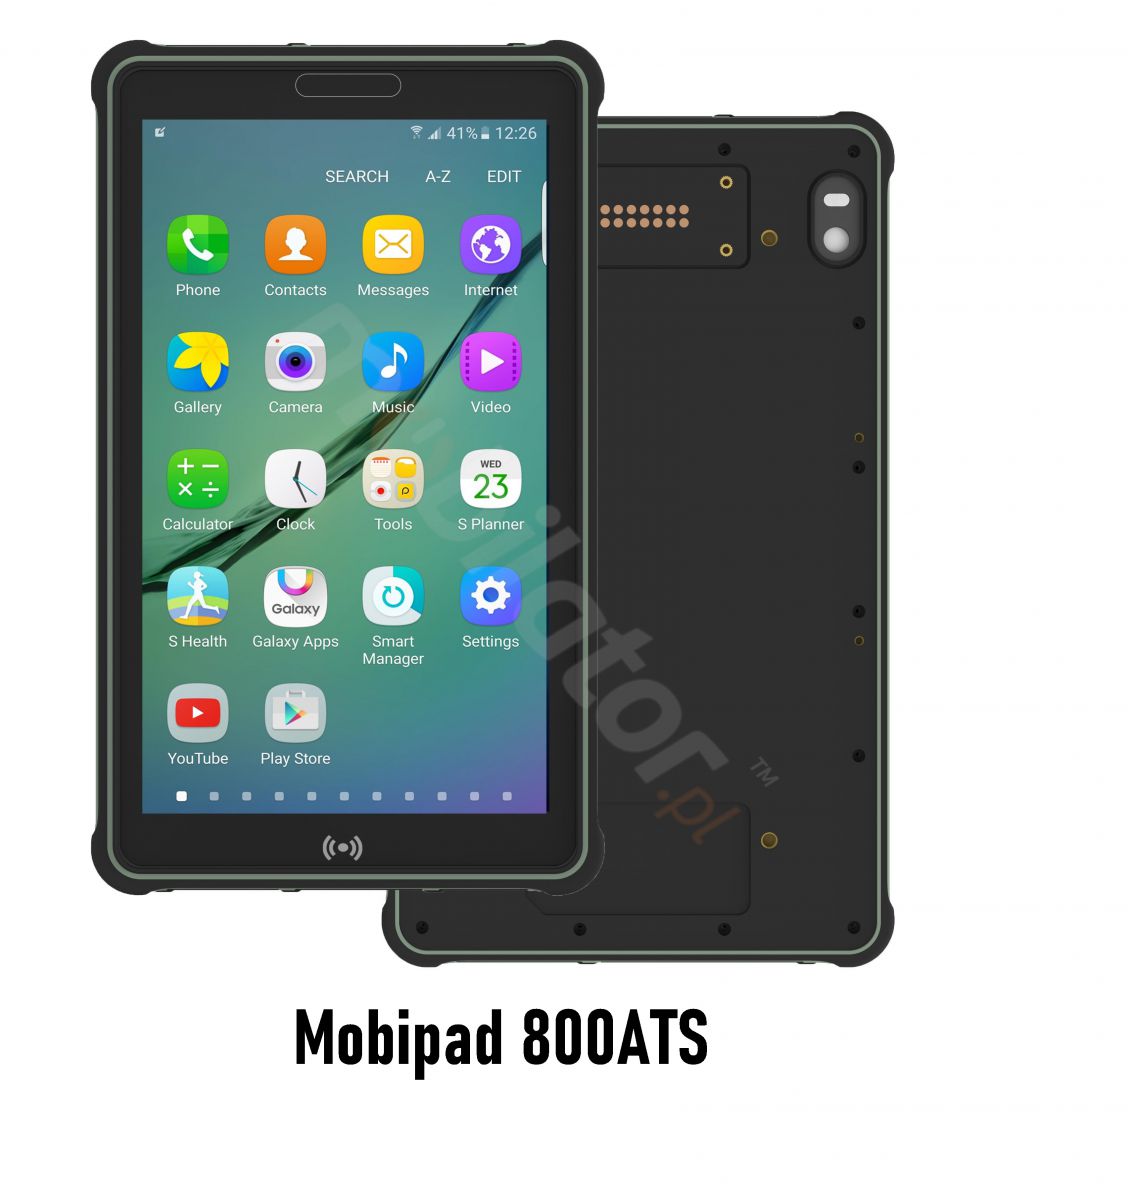 Mobipad 800ATS v.2 - Rugged production tablet with IP65 and MIL-STD-810G standards, 3GB RAM, 32GB disk, Bluetooth 4.0, NFC and EM3296 2D scanner